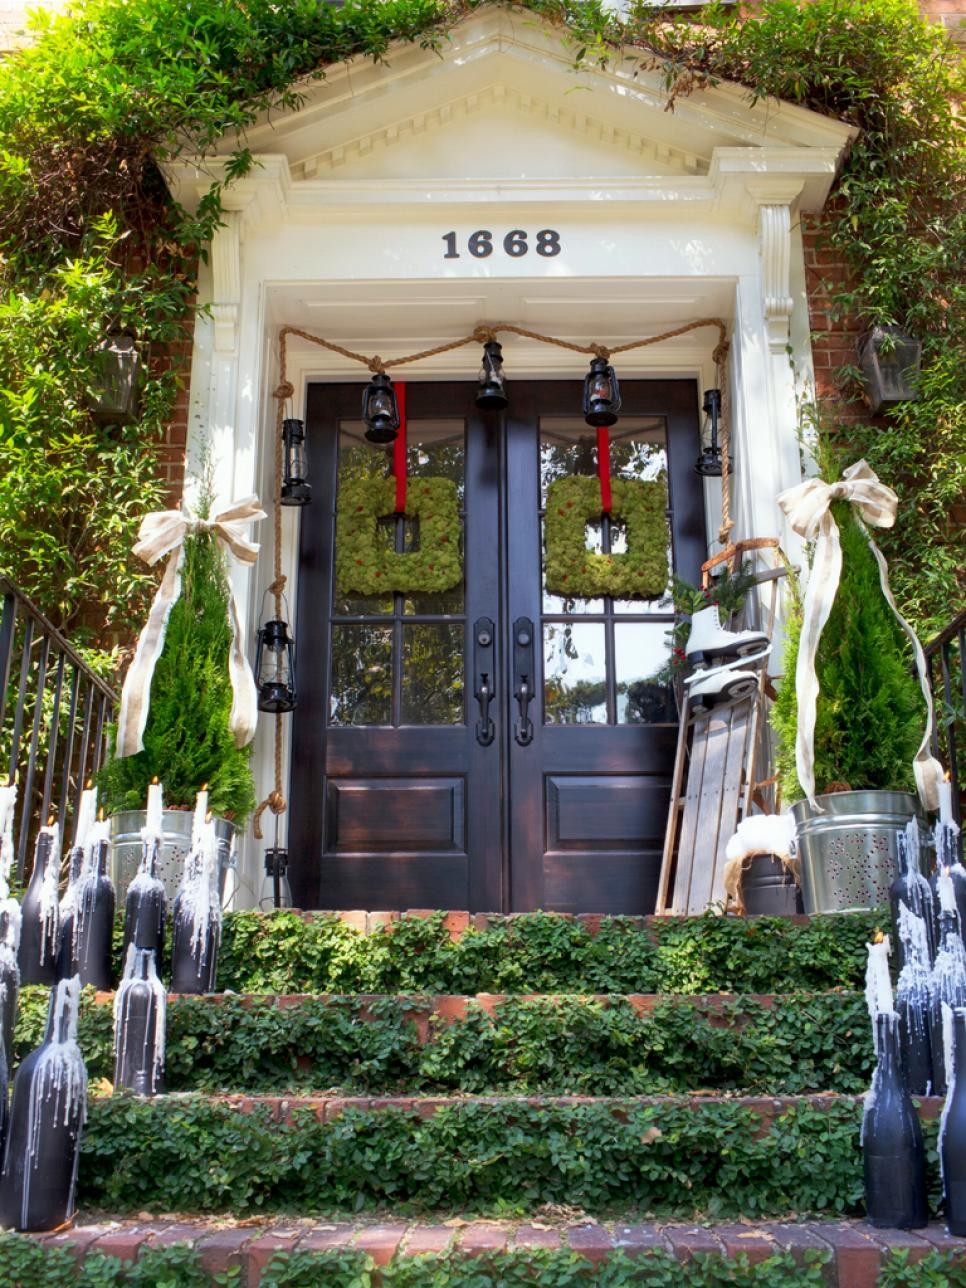 Outdoor Christmas Decorations
 Christmas Decorating Ideas For Porch Festival Around the